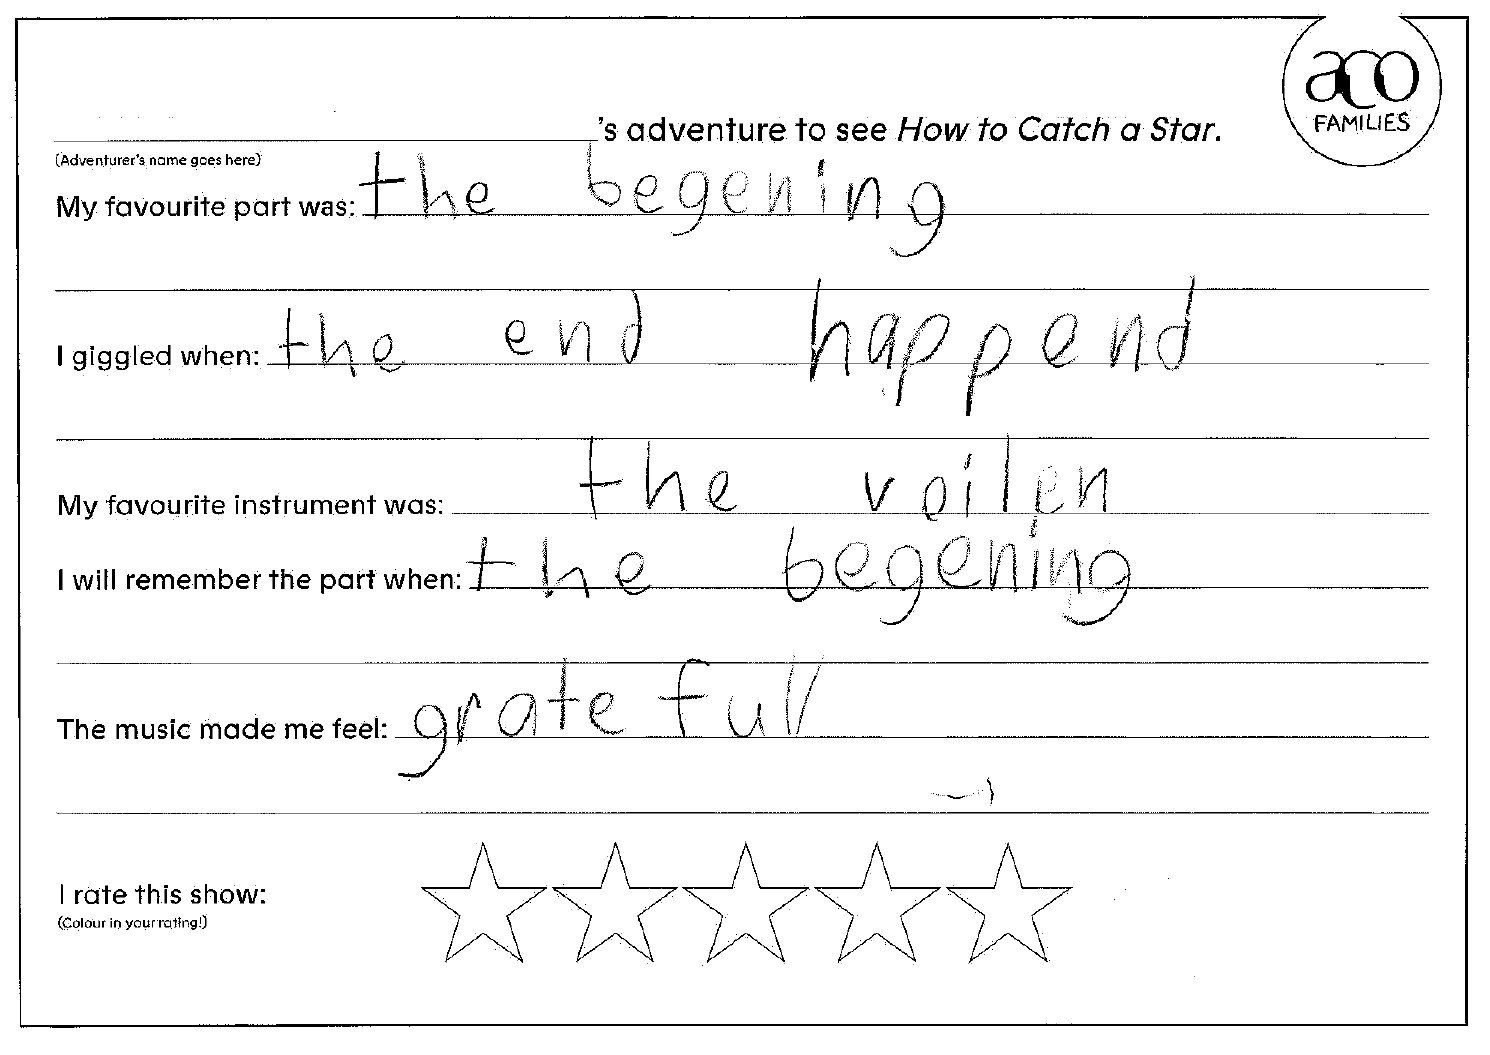 How to Catch a Star ACO Children's Review